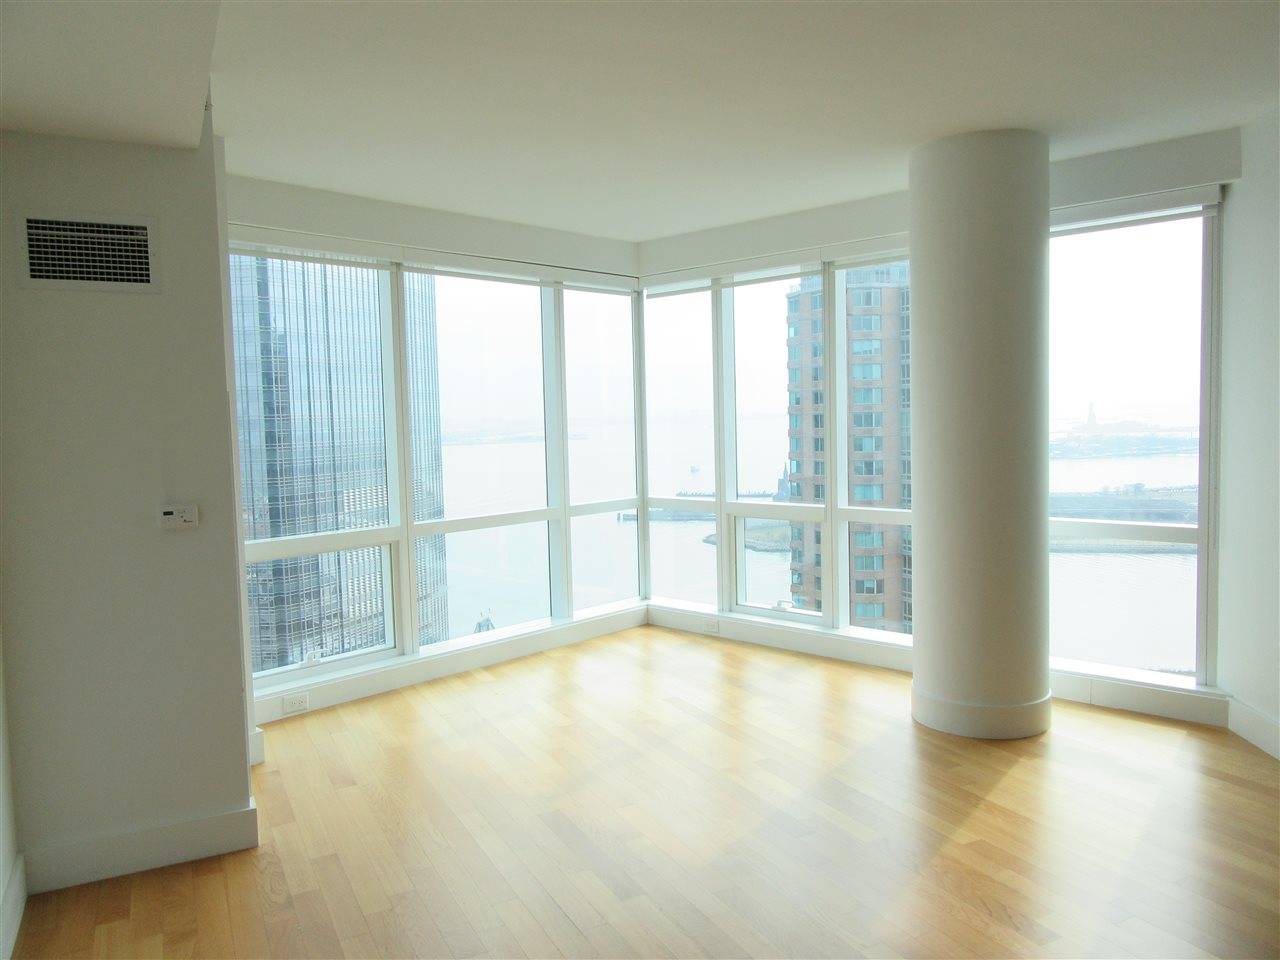 Check out this fantastic 2 bedroom 2 bath with direct NYC views in downtown Jersey City's premier luxury condo building